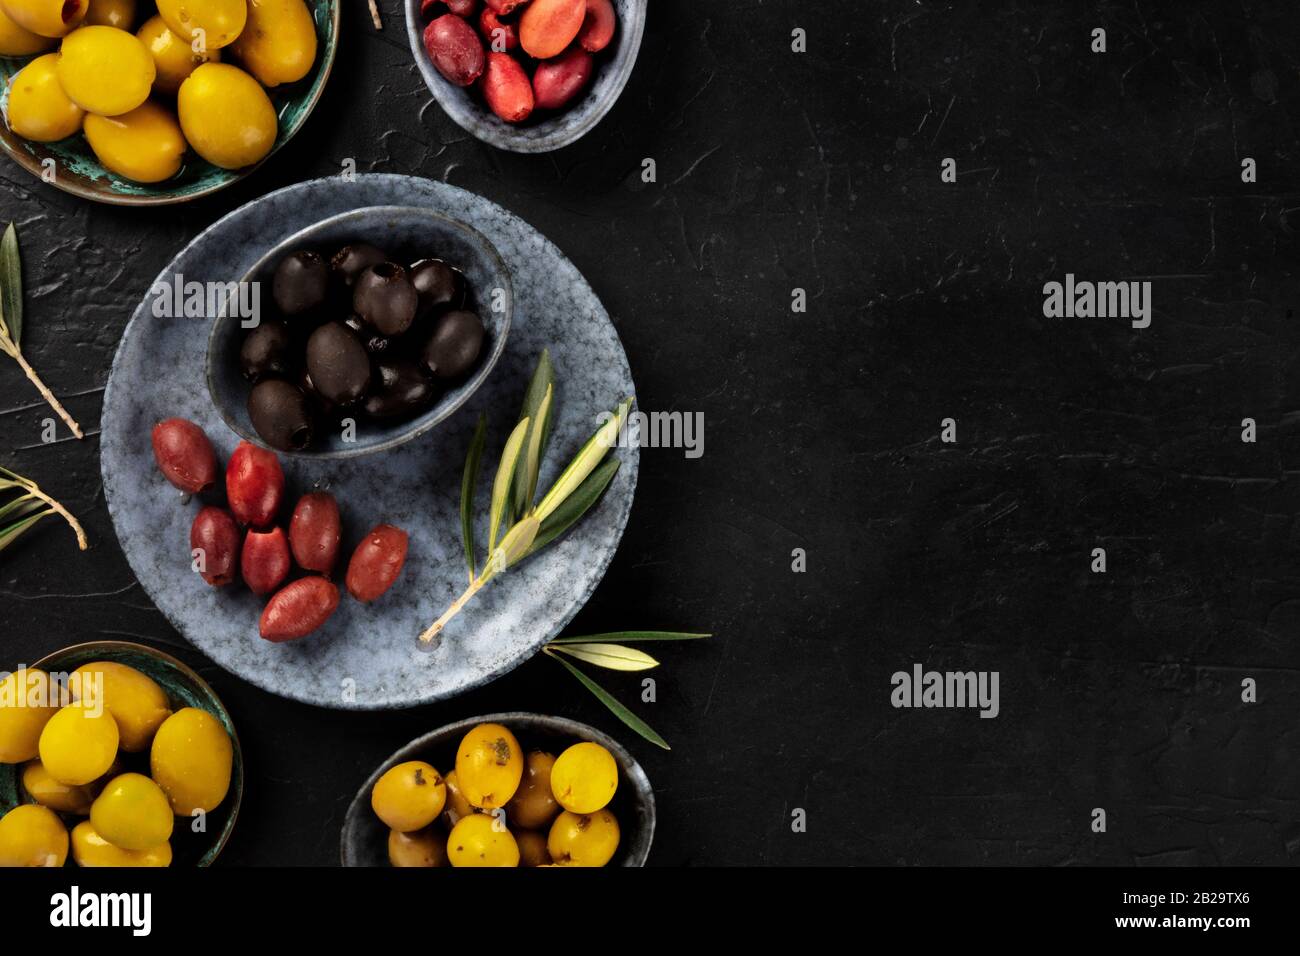 Olives, green, black and red, an assortment with leaves on a dark background with a place for text, shot from above Stock Photo